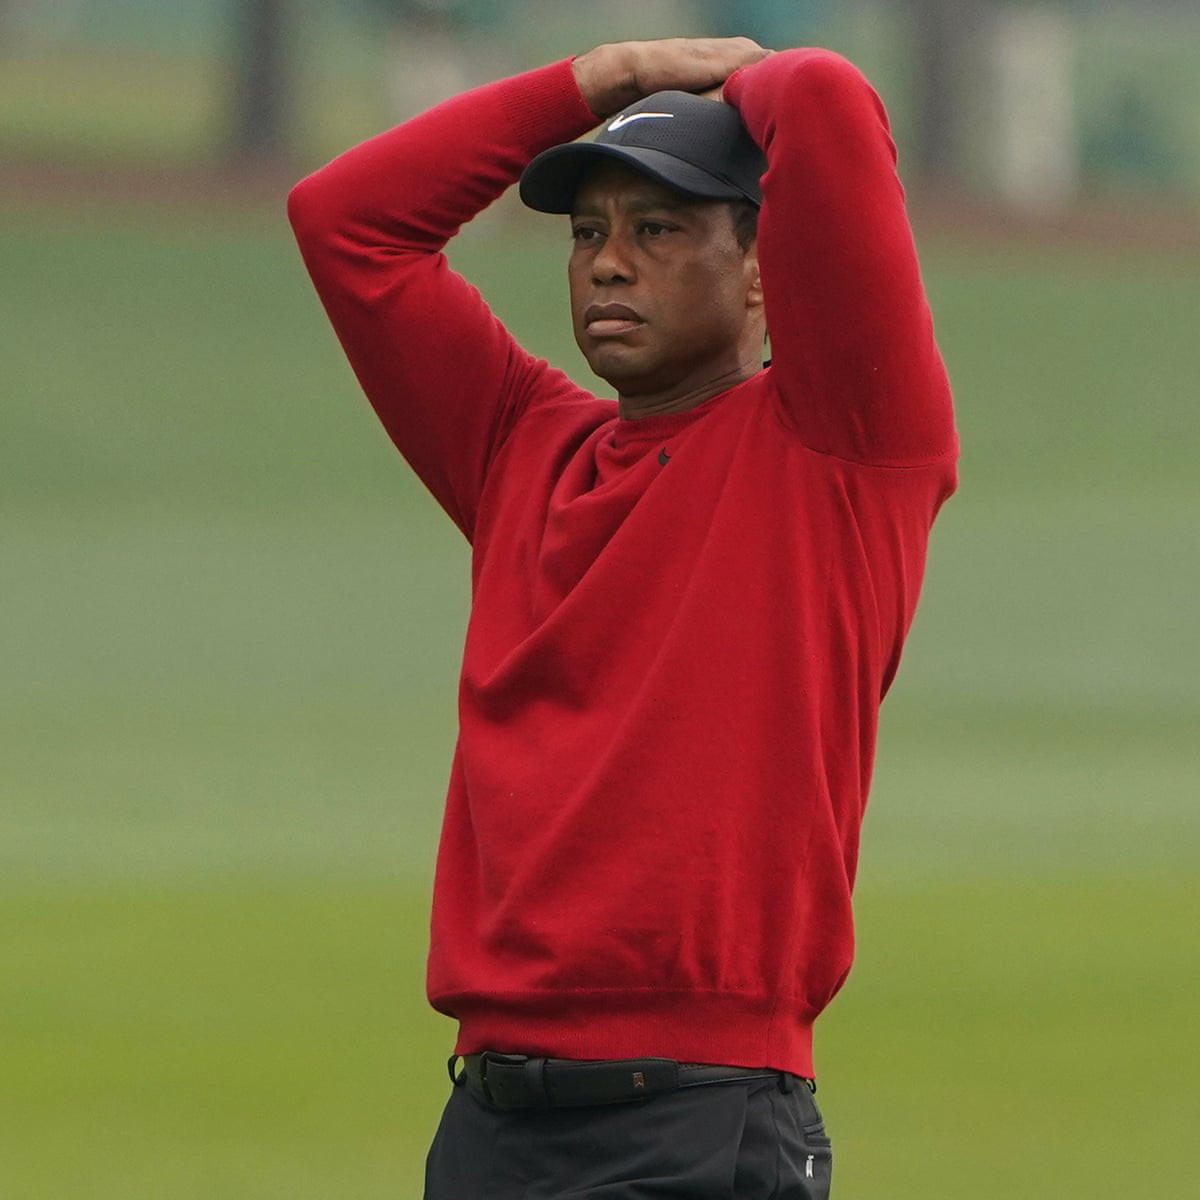 Golf Legend, Tiger Woods Undergoes Back Surgery For The Fifth Time